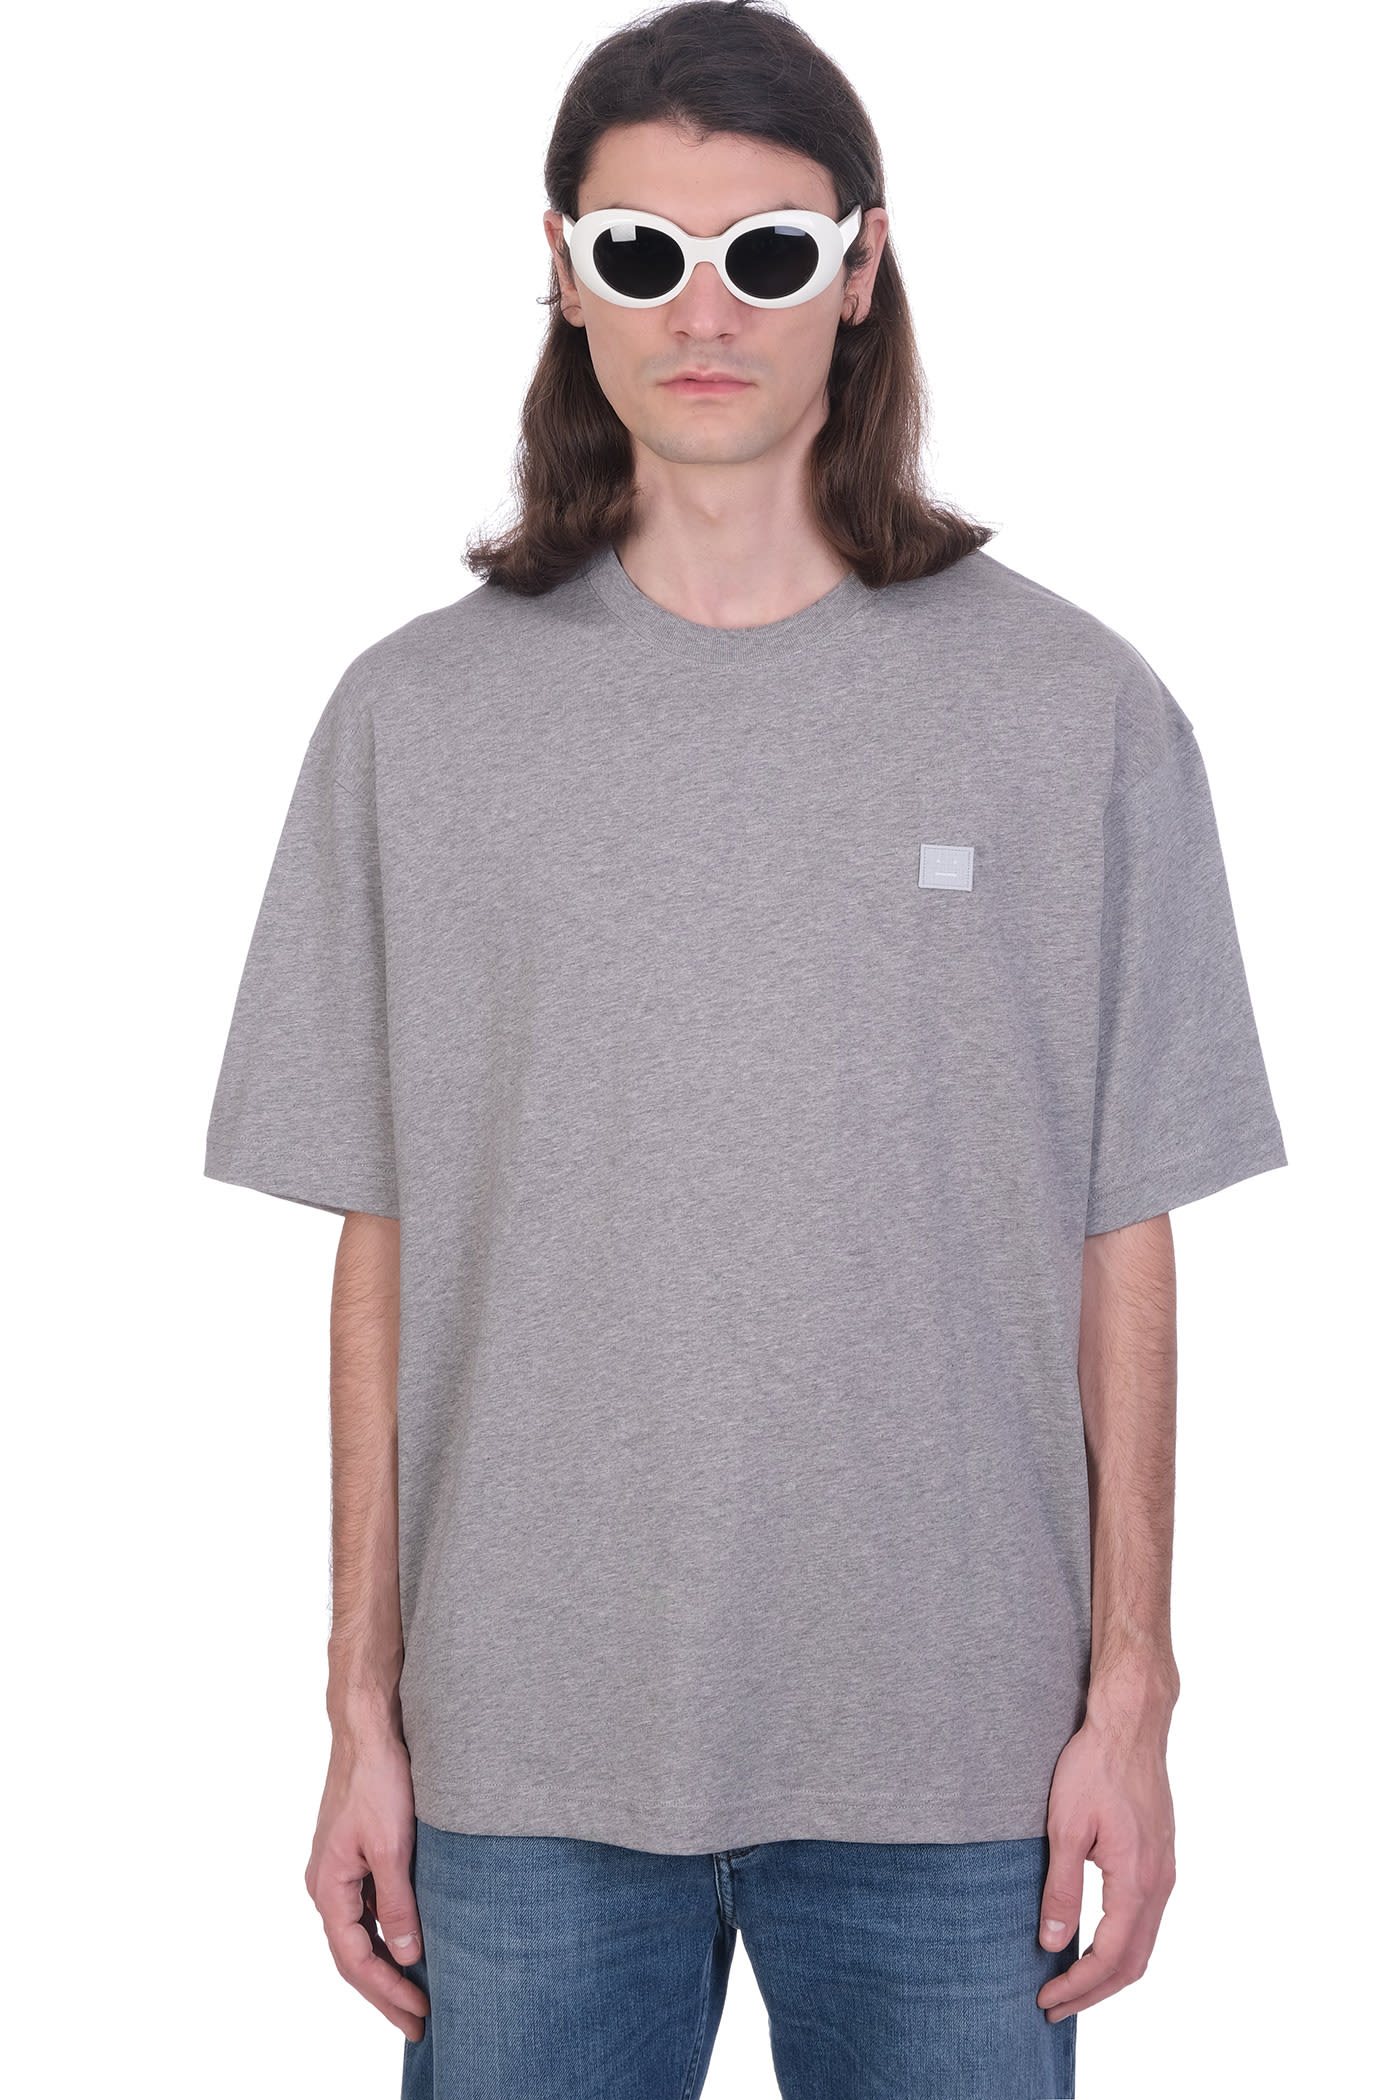 Acne Studios Exford Face T-shirt In Grey Cotton